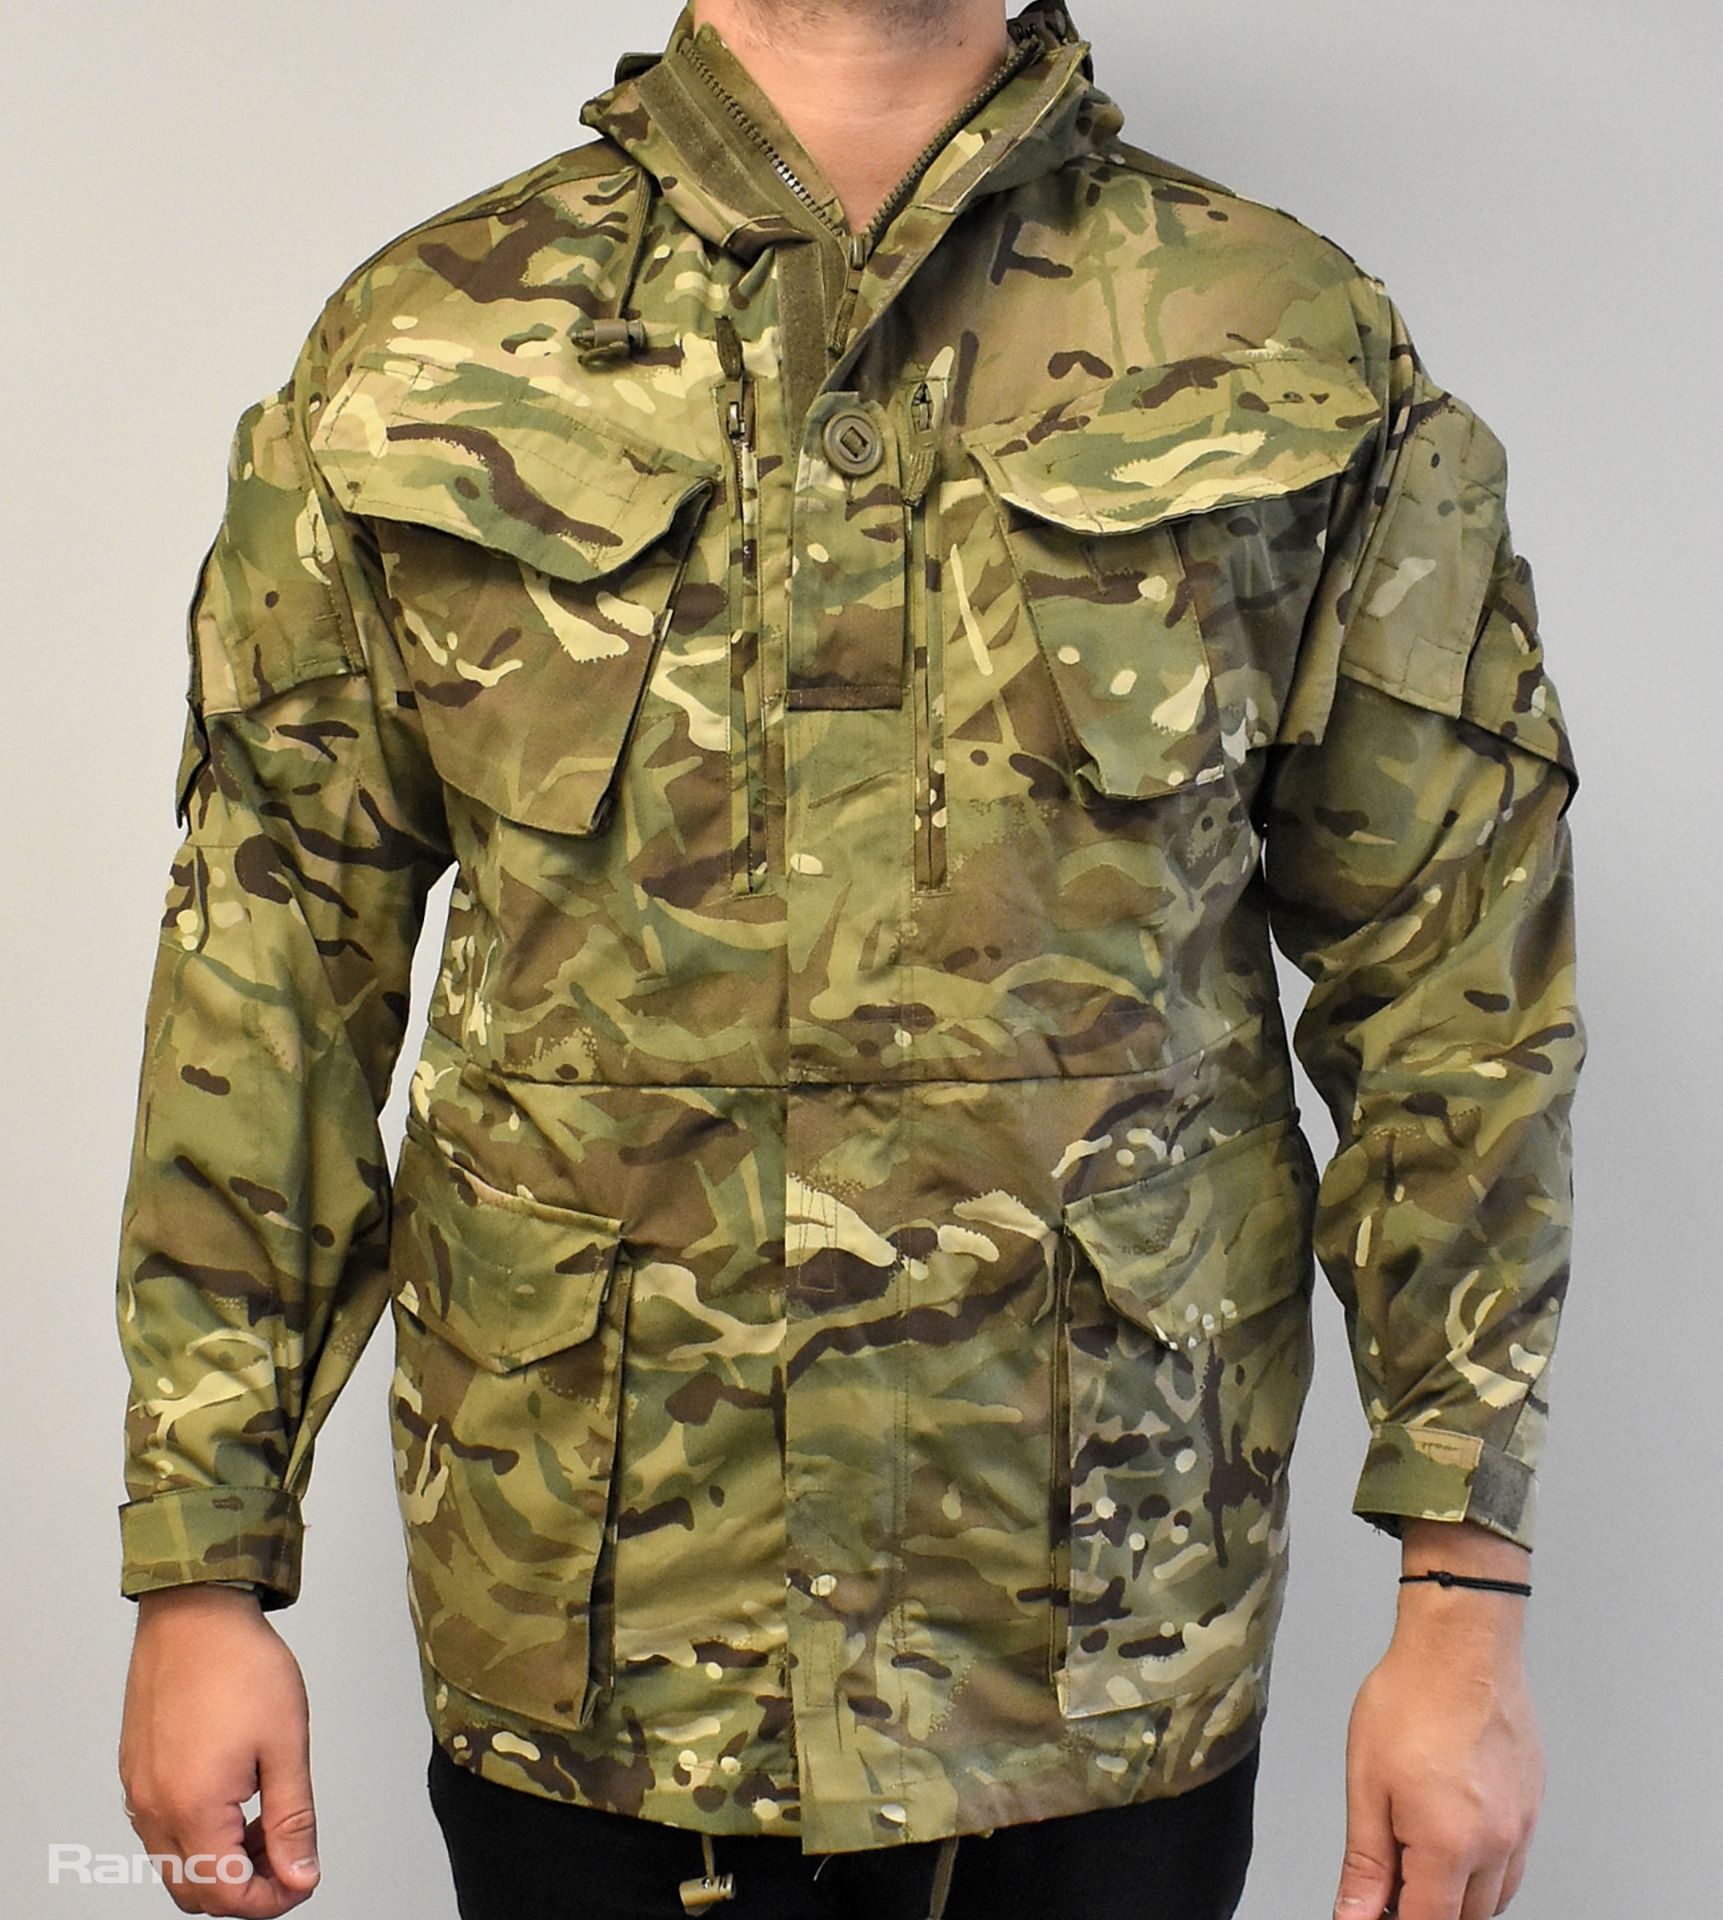 40x British Army MTP combat smocks 2 windproof - mixed grades and sizes